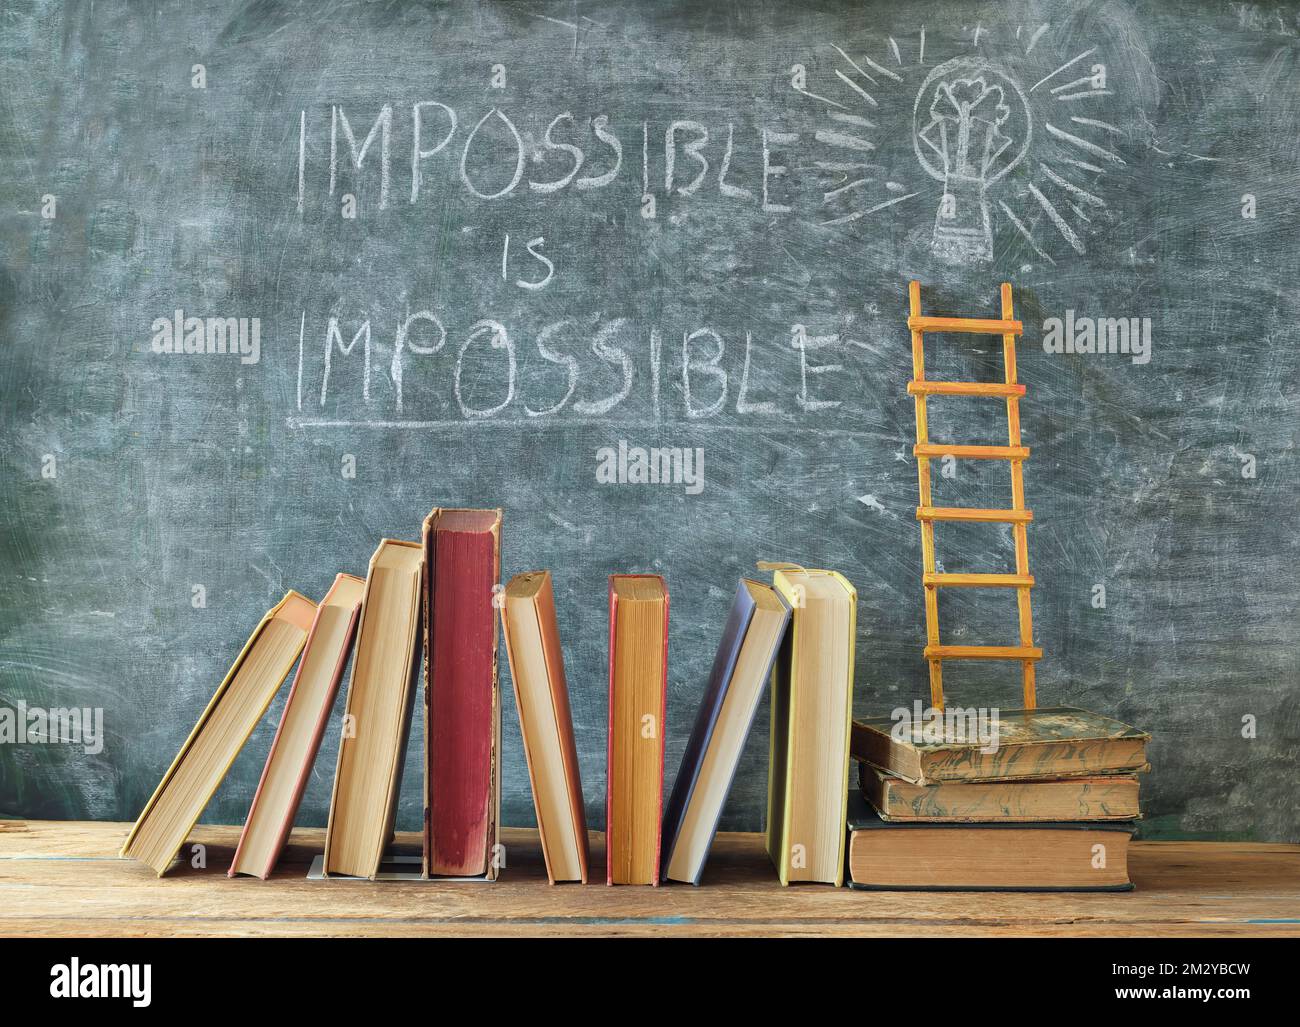 Stack of hardback books with slogan impossible is impossible on blackboard.Learning,education,development, ladder of sucess and back to school concept Stock Photo